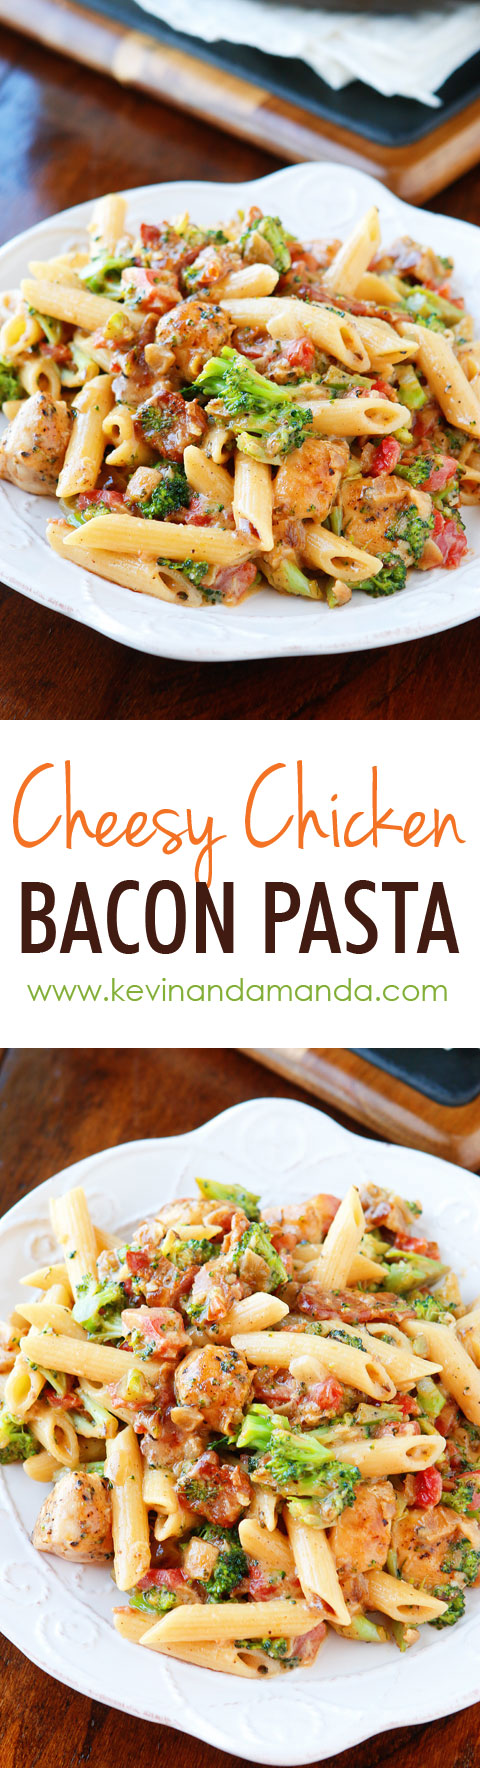 This is like an ultra creamy, cheesy broccoli soup with bacon, chicken, and pasta!! Seriously what on earth could be better? Cheesy. Bacon. Pasta. Need I say more??